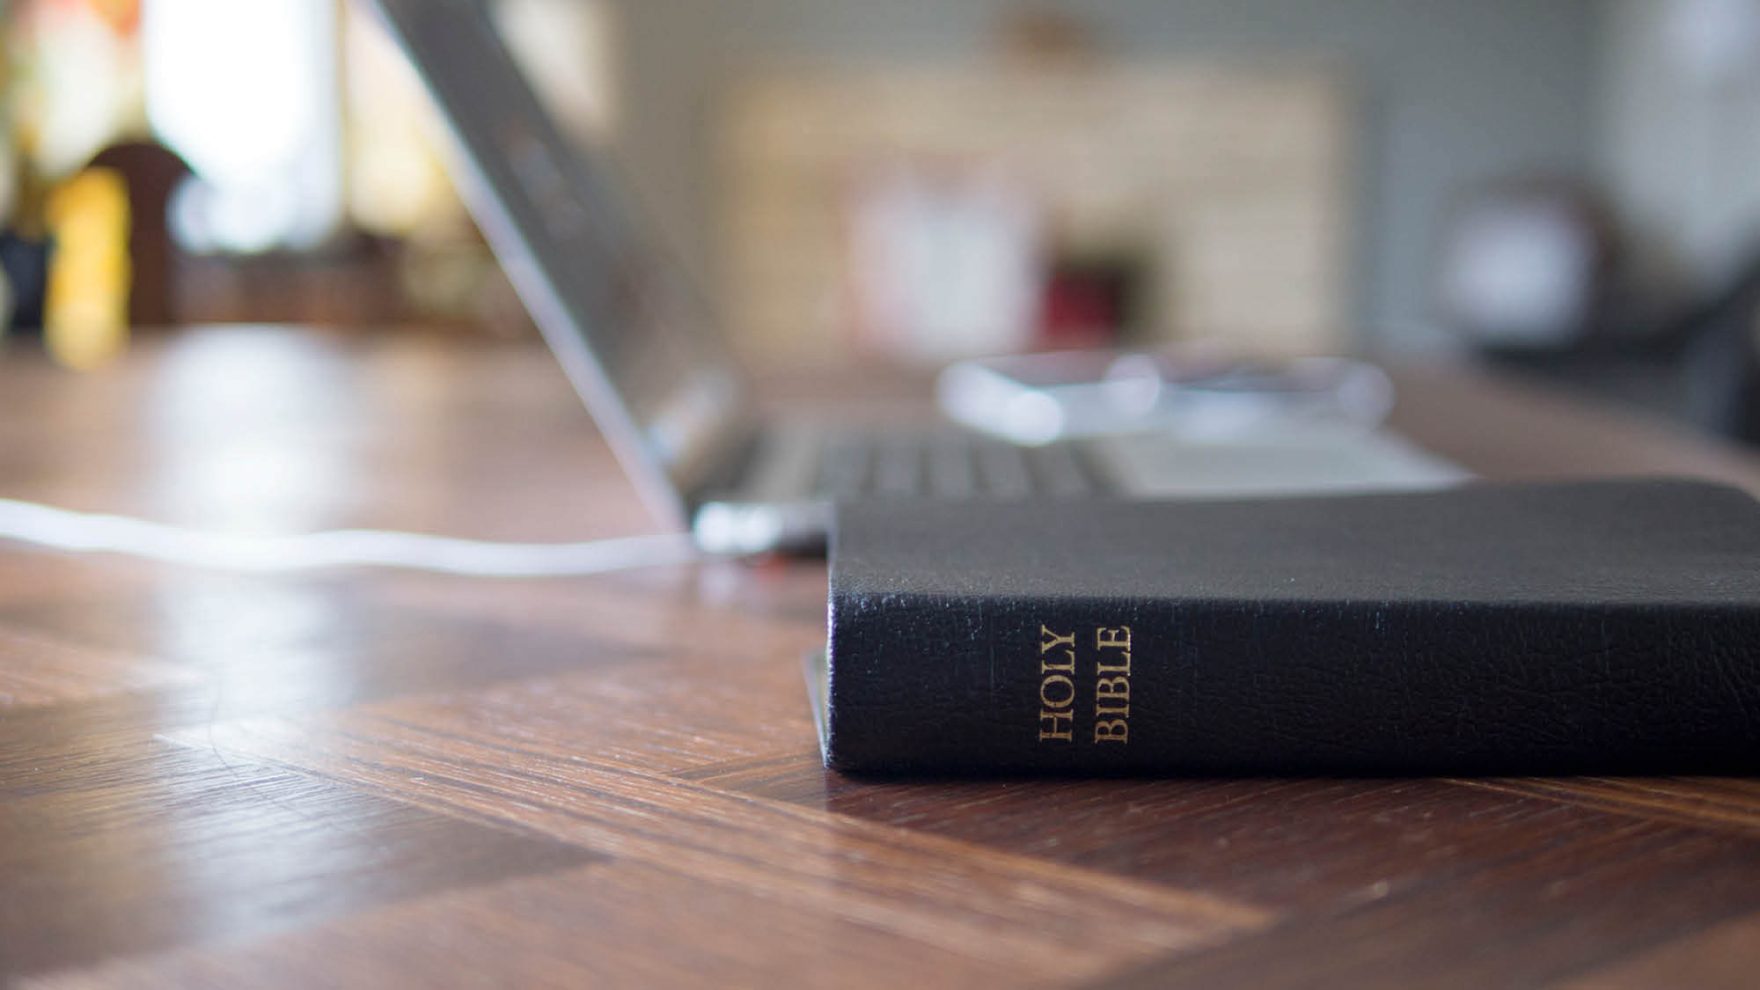 The Holy Bible next to a laptop: Explore the master of Divinity in Biblical Studies at Regent University.